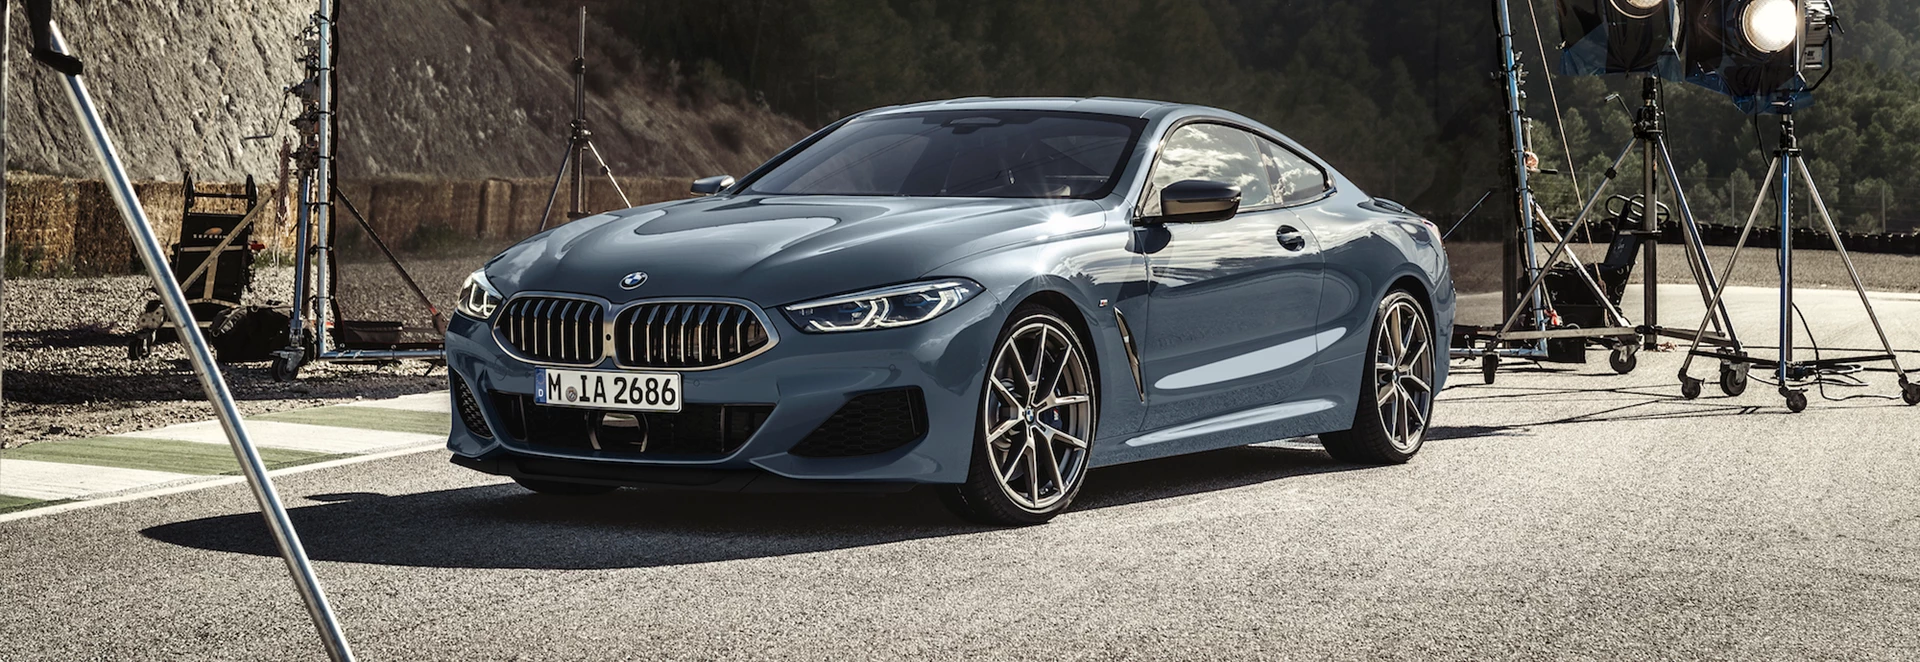 2018 BMW 8 Series coupe revealed